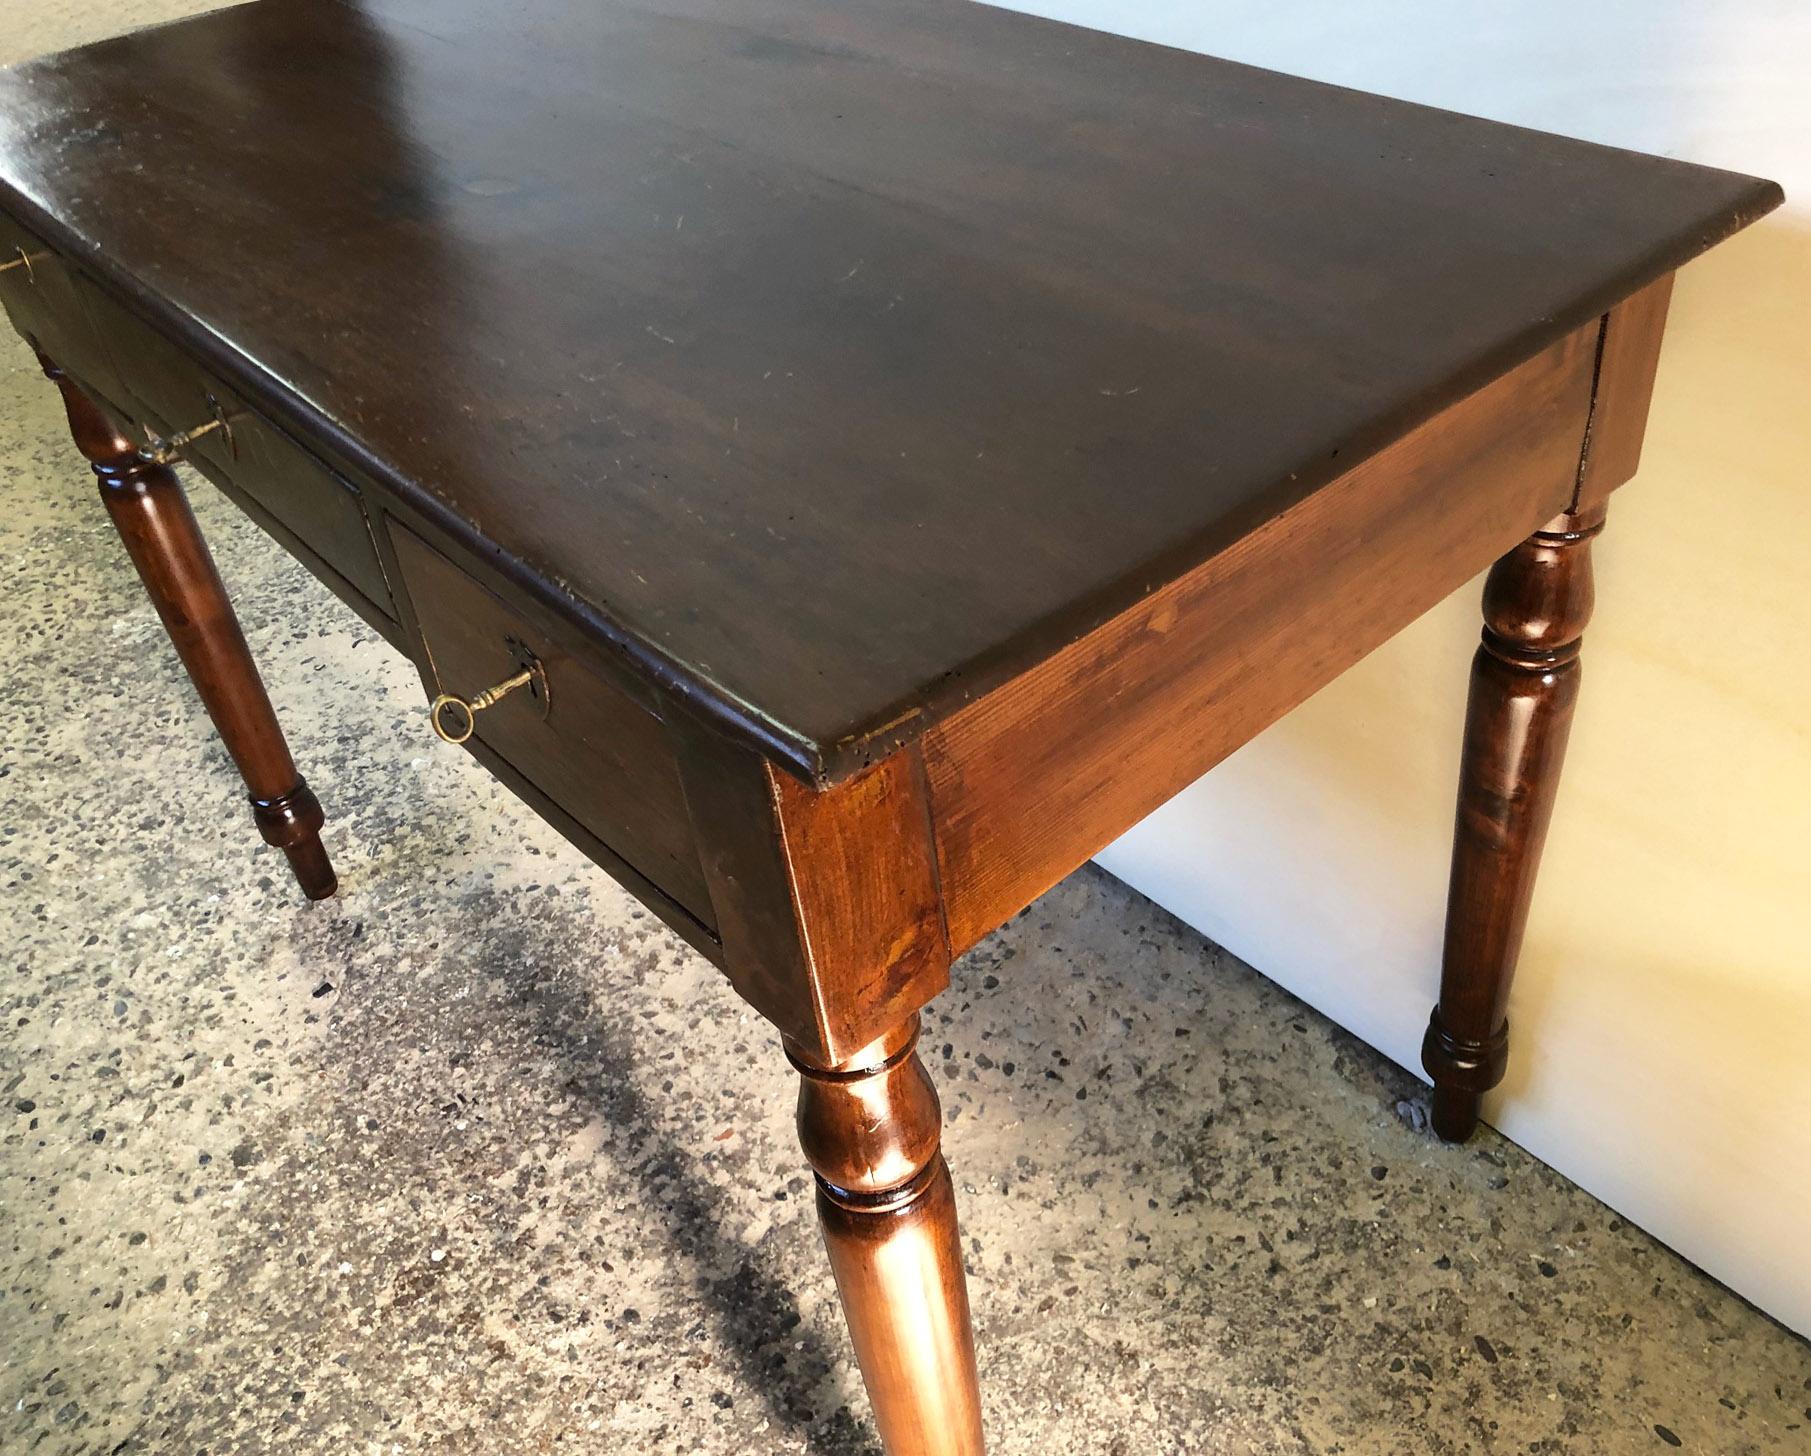 Original 1900 Italian desk in walnut and fir, with three drawers, turned leg.
It originally belonged to a family doctor's office.
They will be delivered in a specific wooden case for export, packed in bubble wrap.
Comes from an old country house in